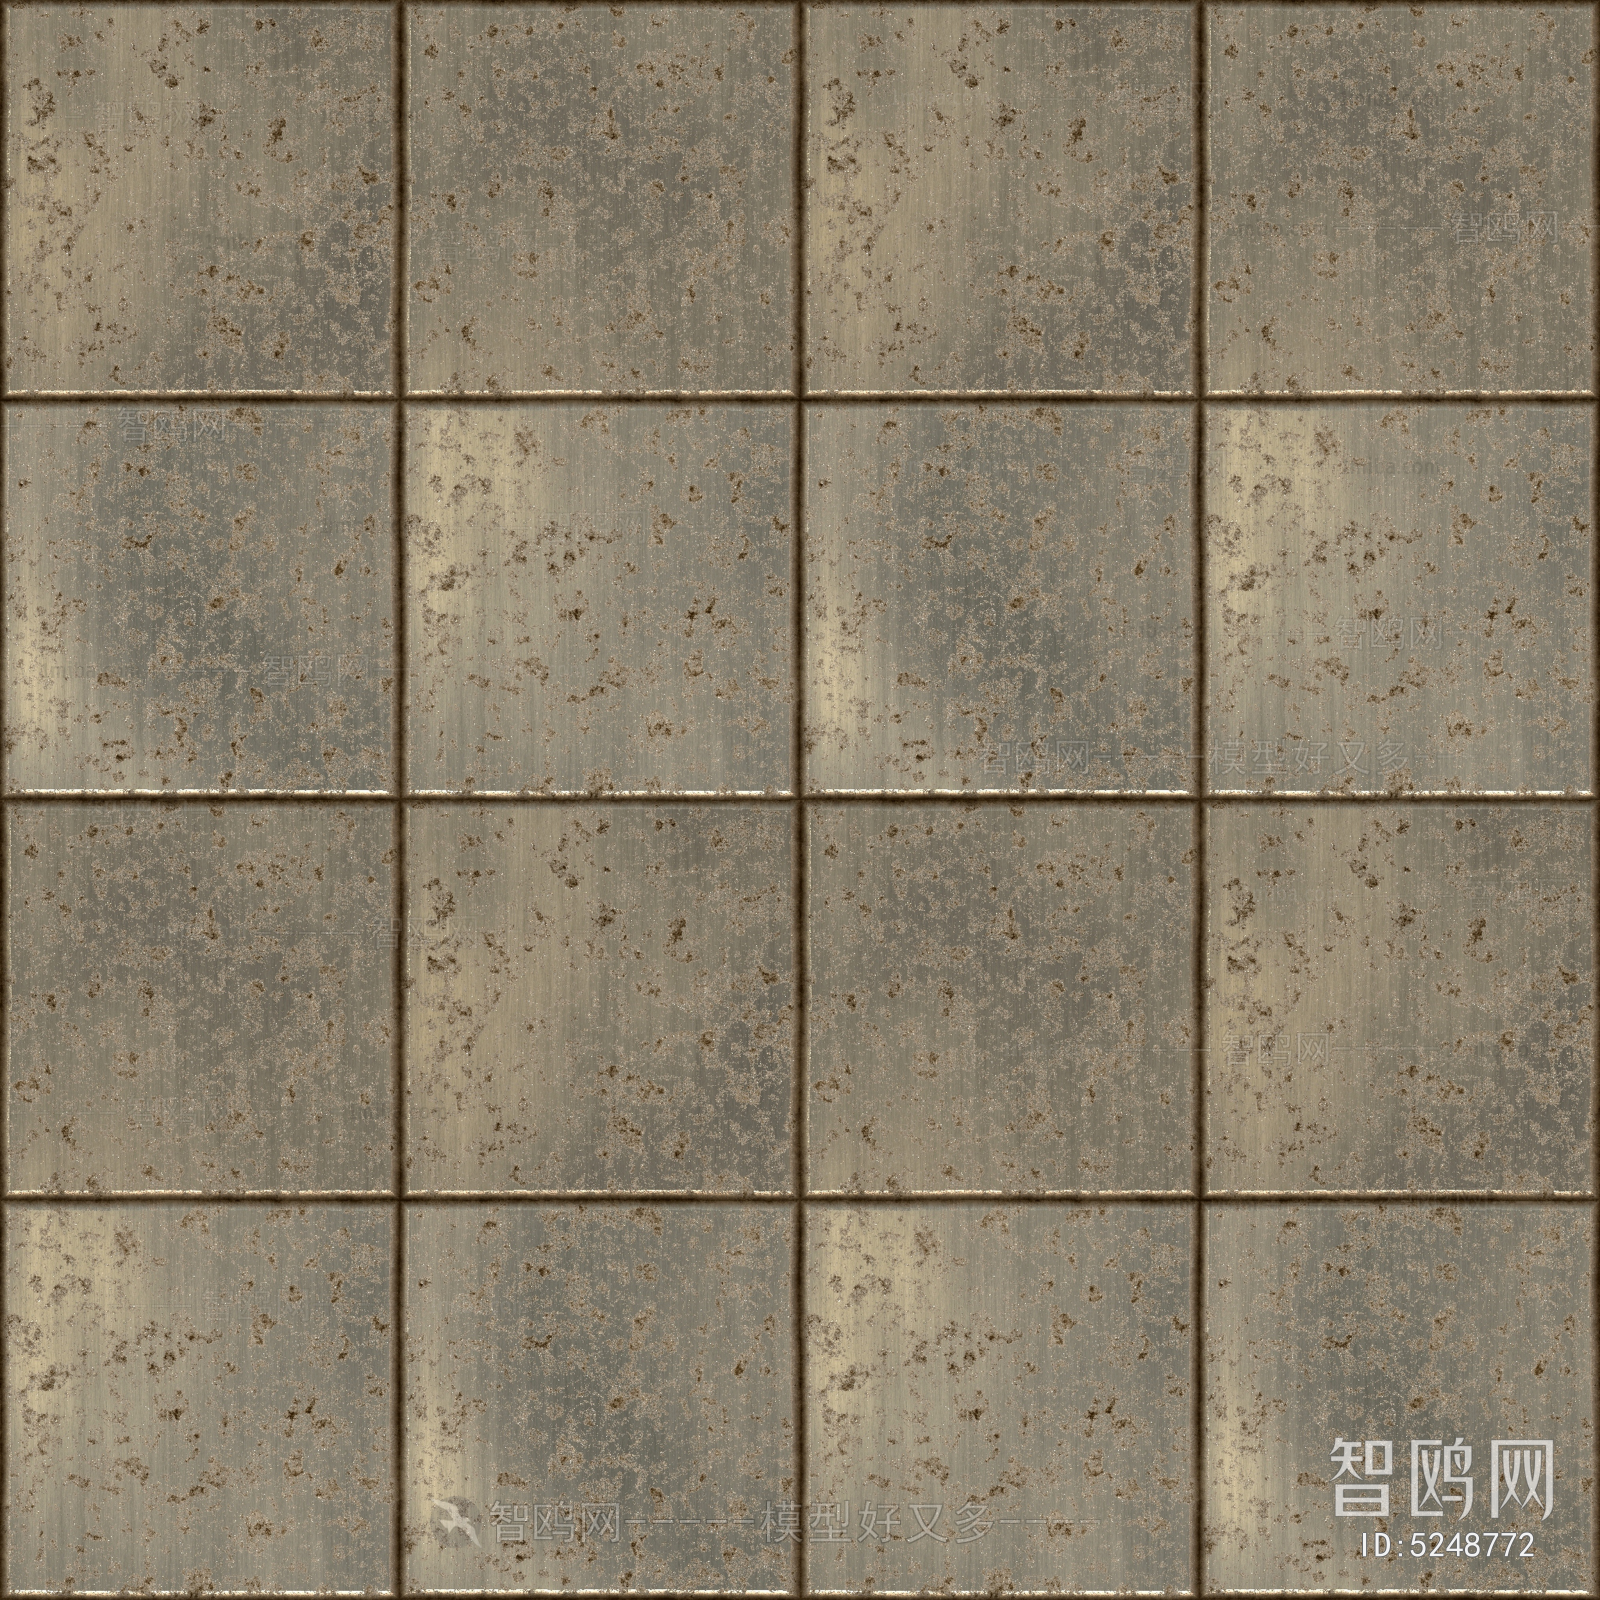 Other Stone Textures